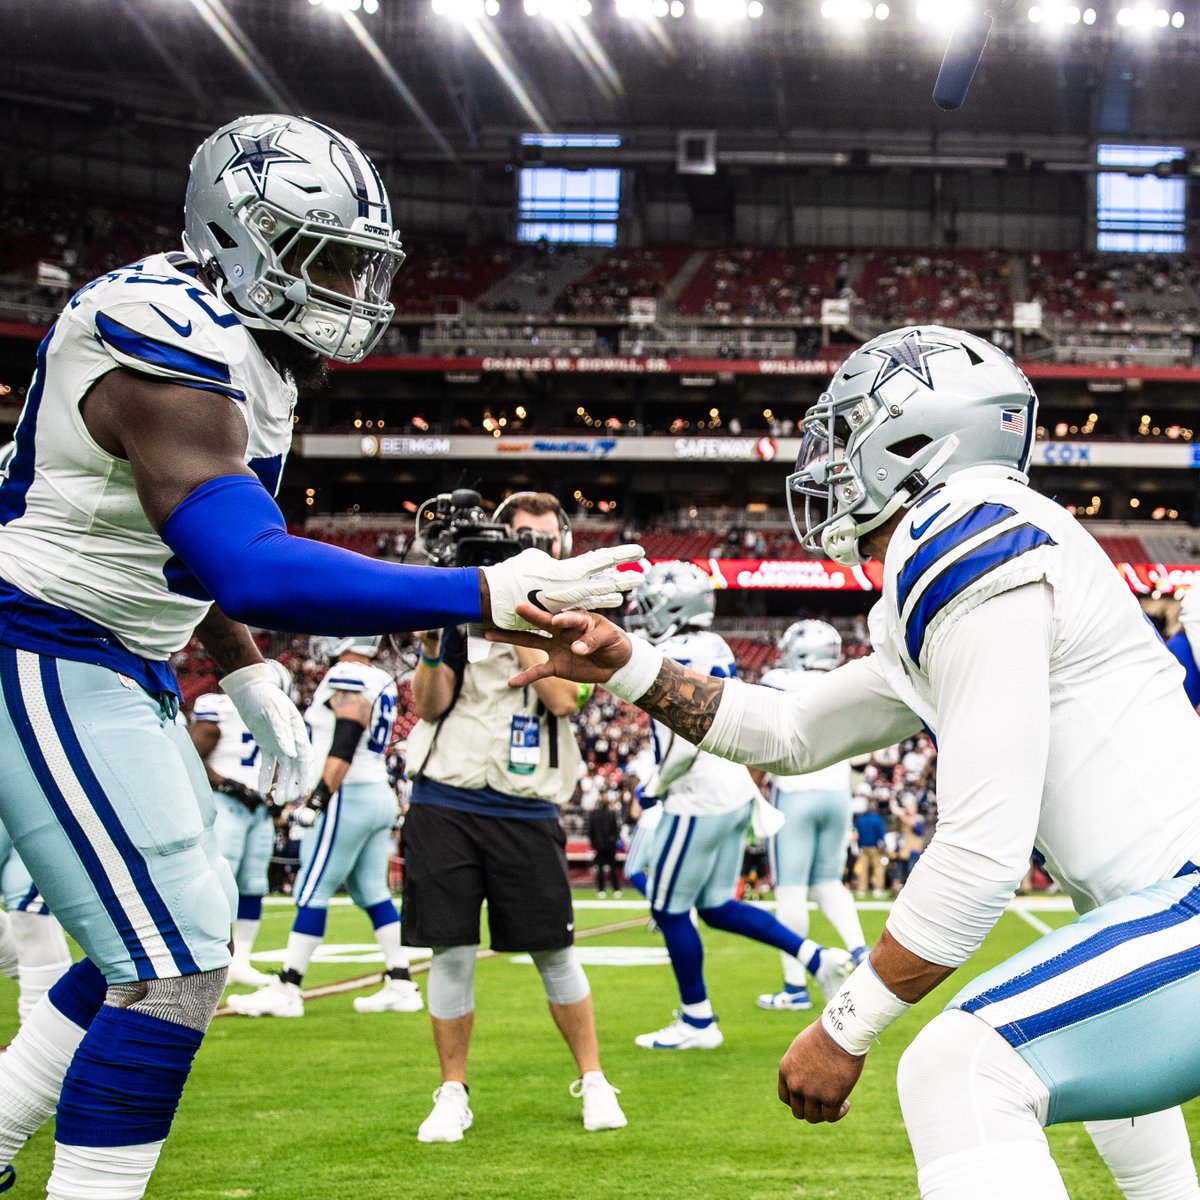 Strength in unity, power in support 🤝 #WPMOYChallenge + @TankLawrence